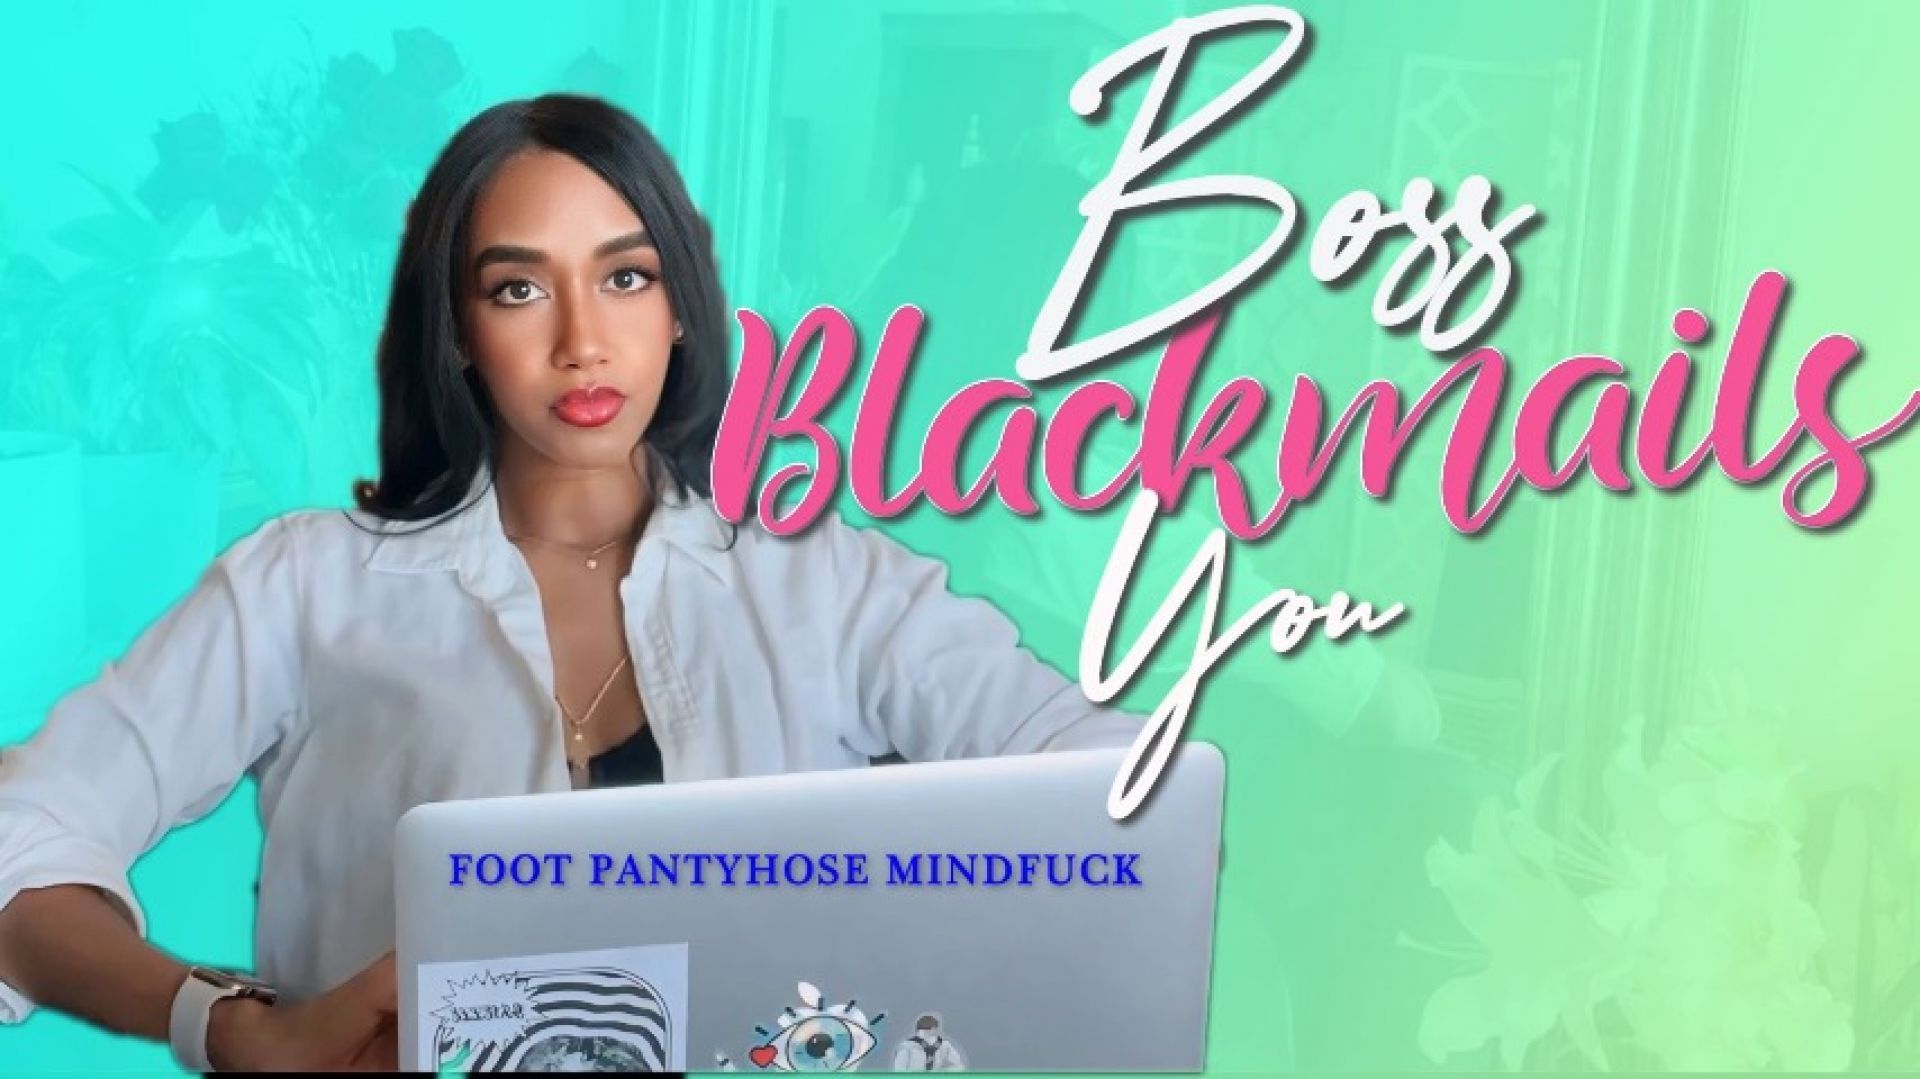 Boss Blackmails You - Foot Pantyhose Mindfuck